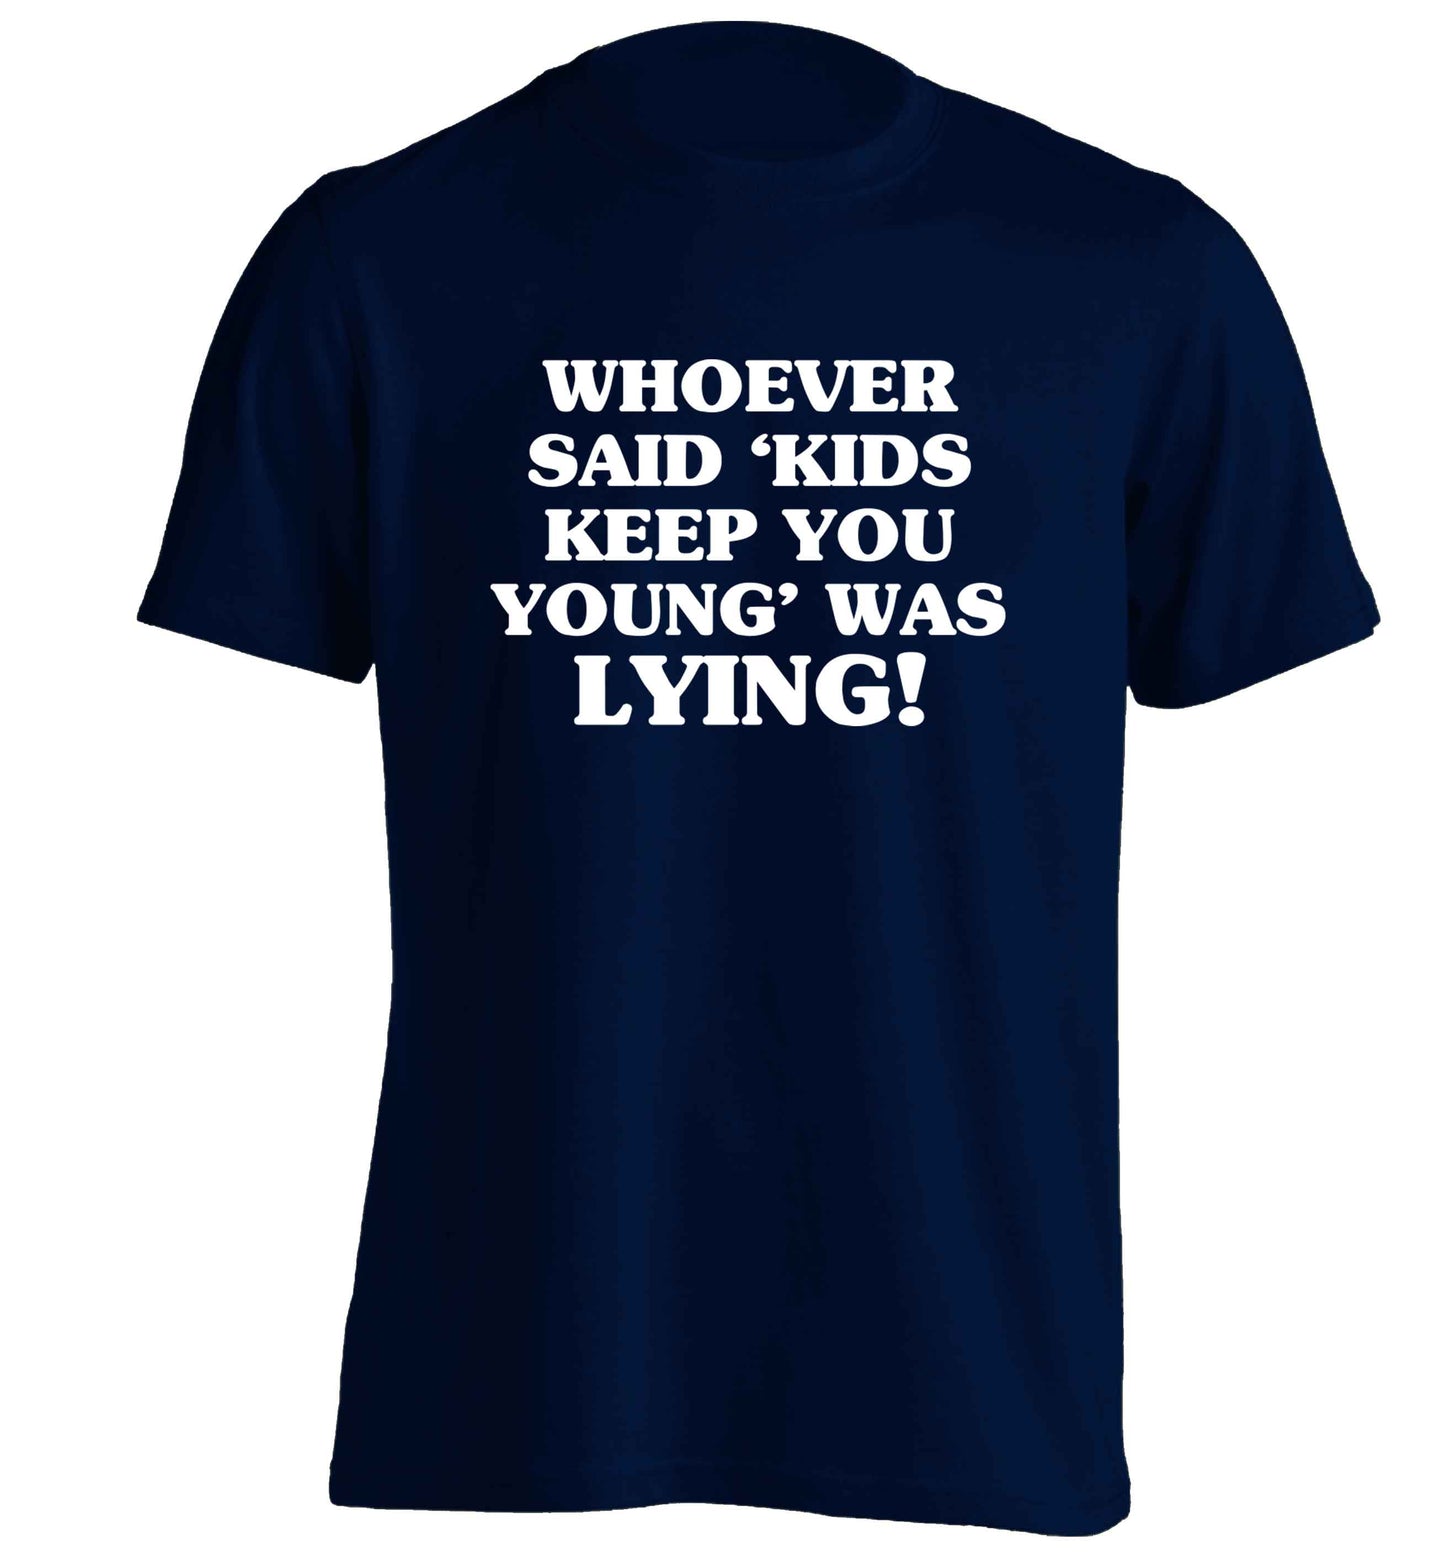 Whoever said 'kids keep you young' was lying! adults unisex navy Tshirt 2XL